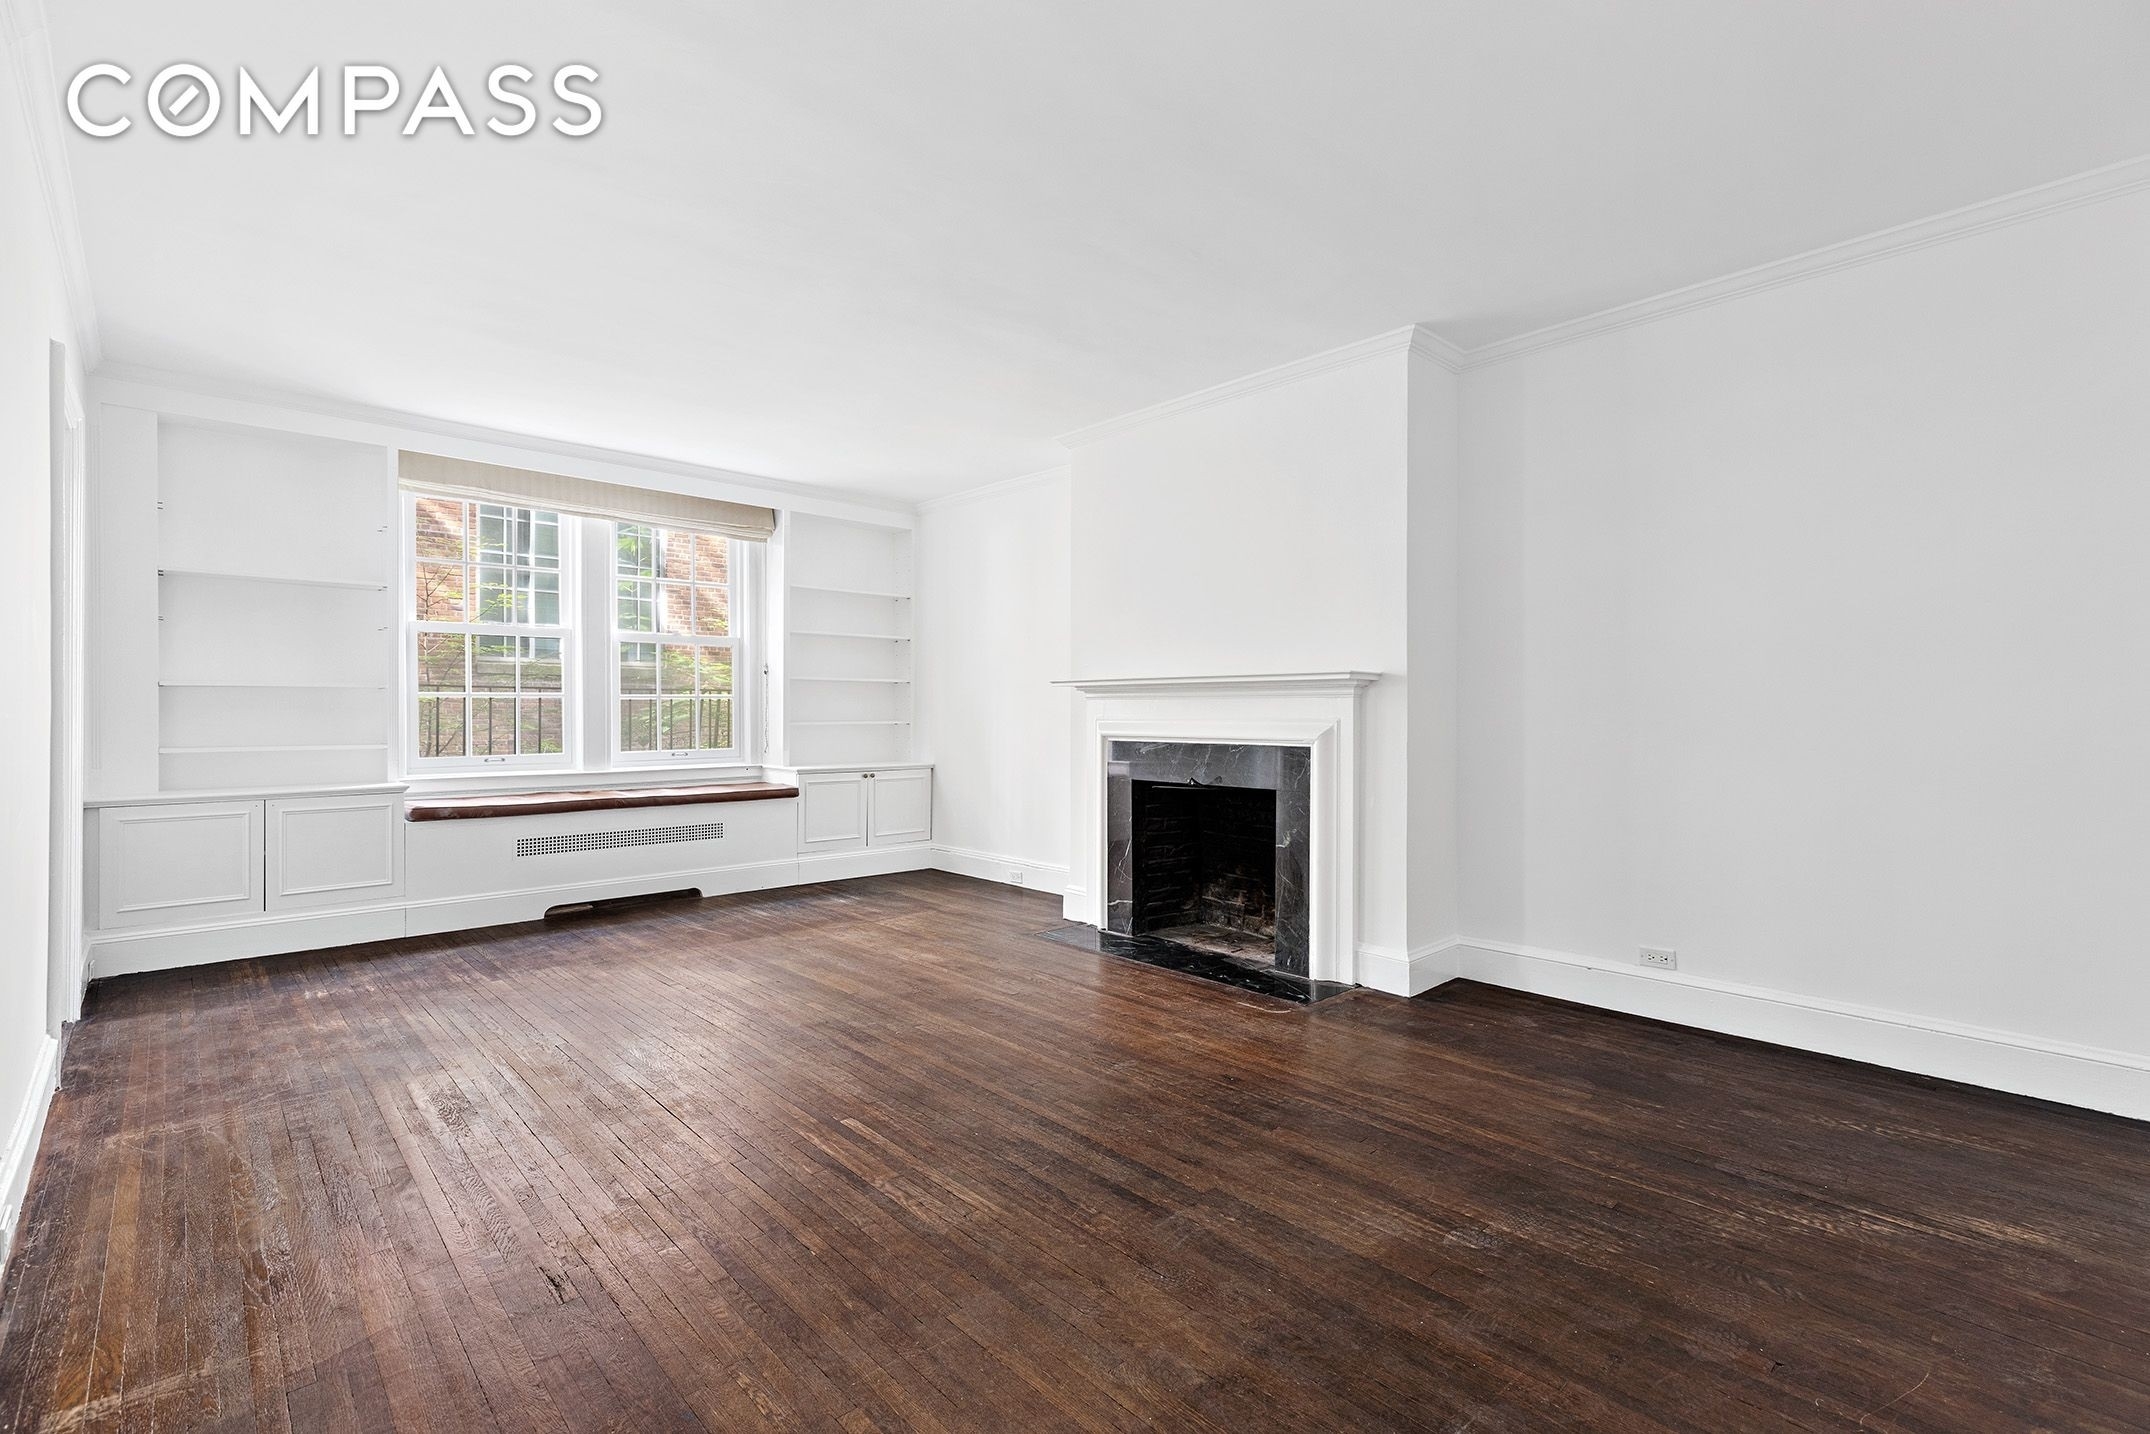 9. Co-op Properties for Sale at 222 E 71ST ST, 1D Lenox Hill, New York, New York 10021